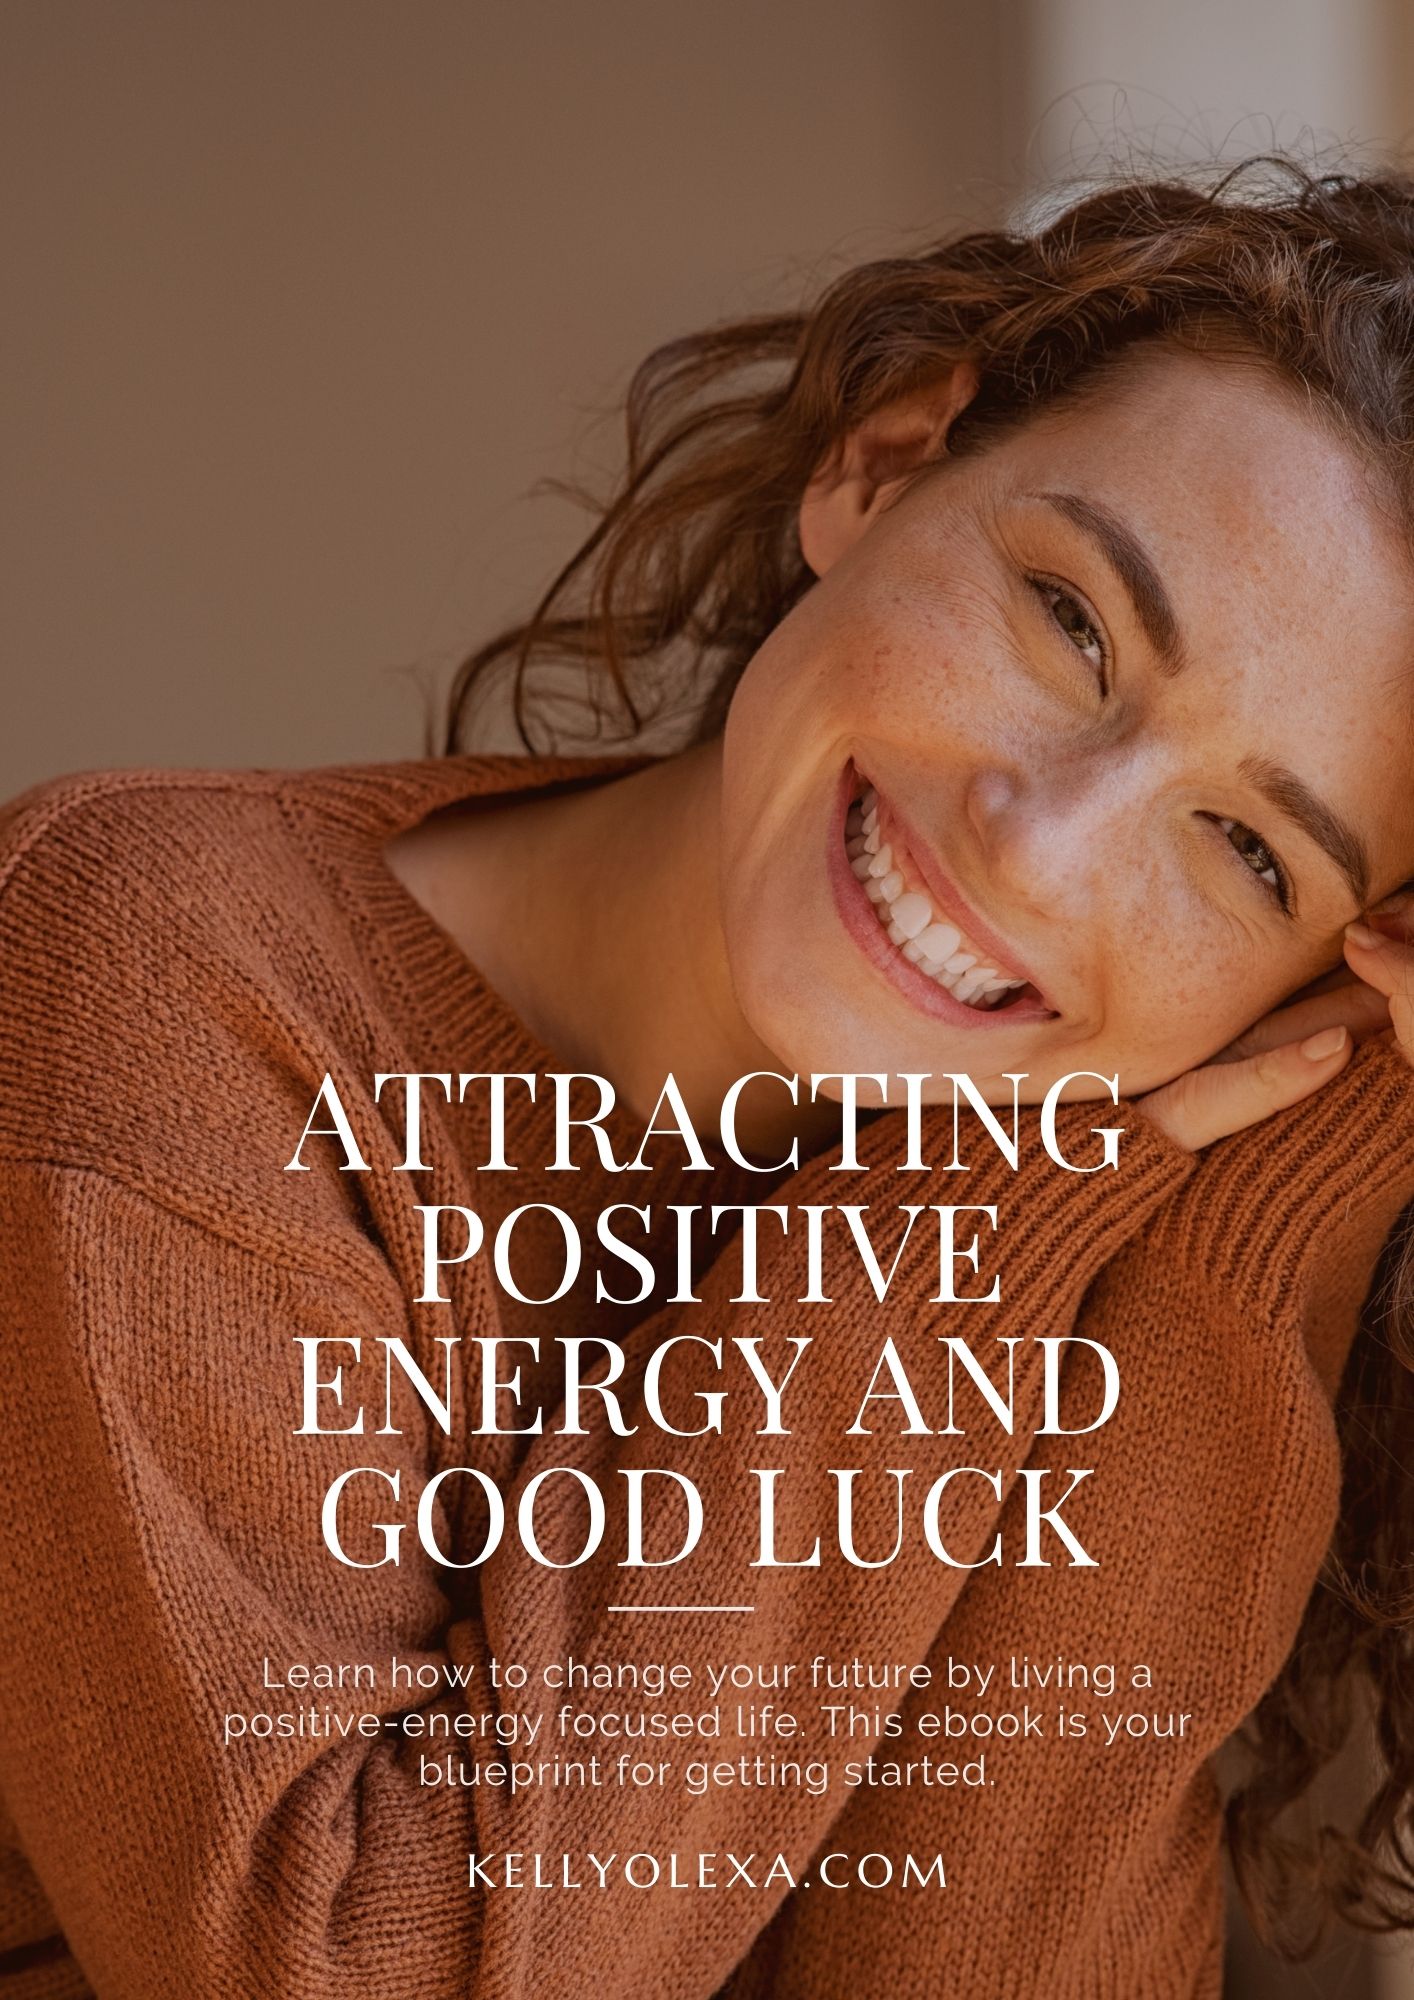 Attracting Positive Energy and Good Luck